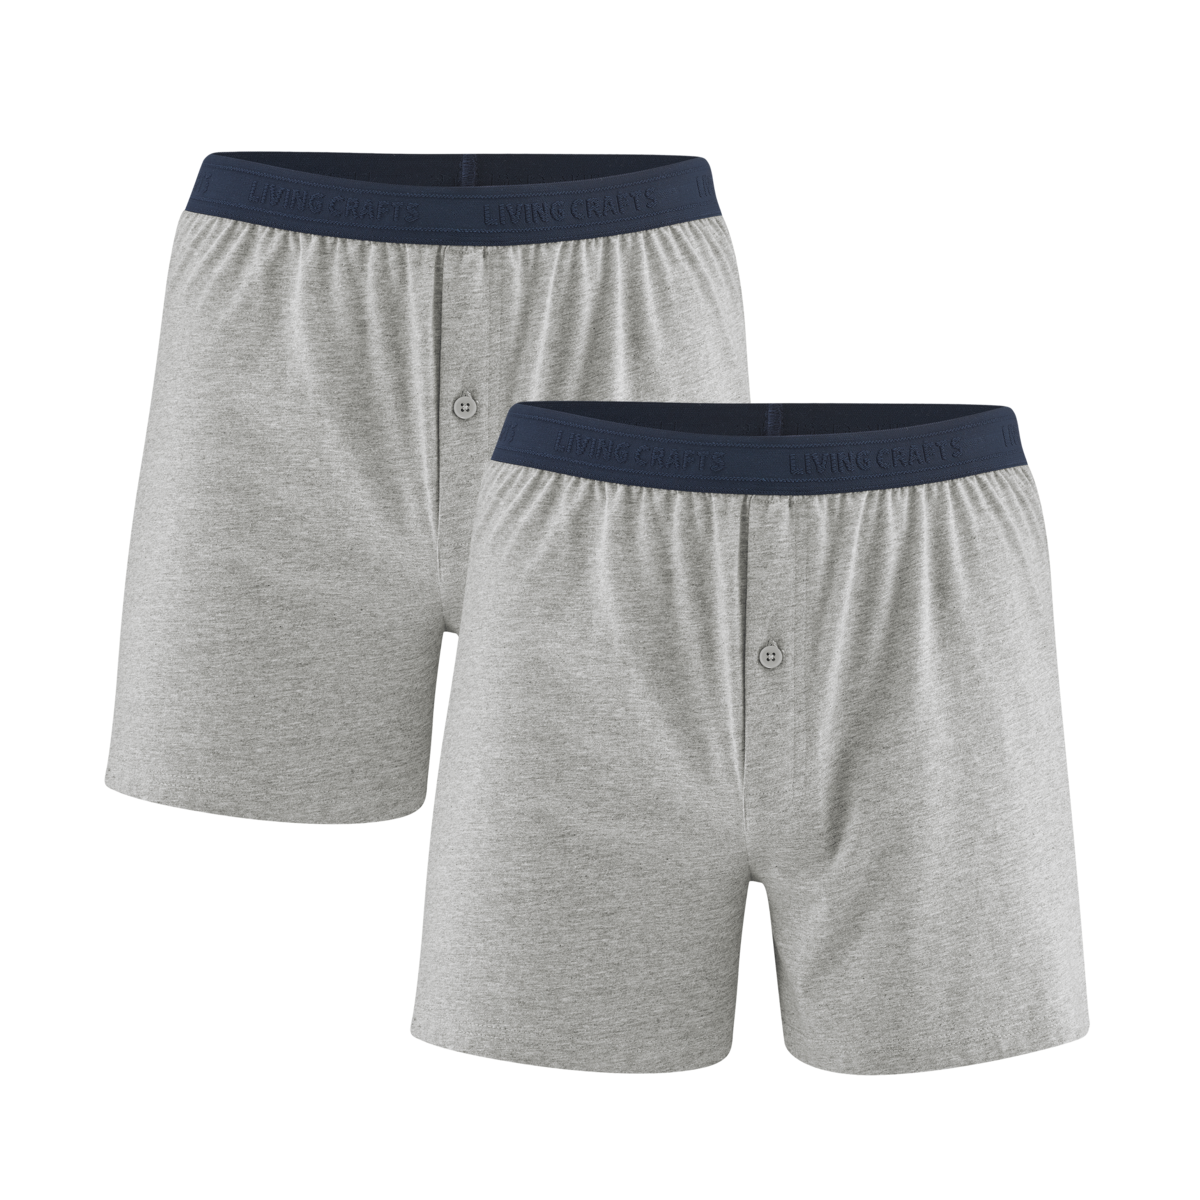 Grey Boxer shorts, pack of 2, ETHAN